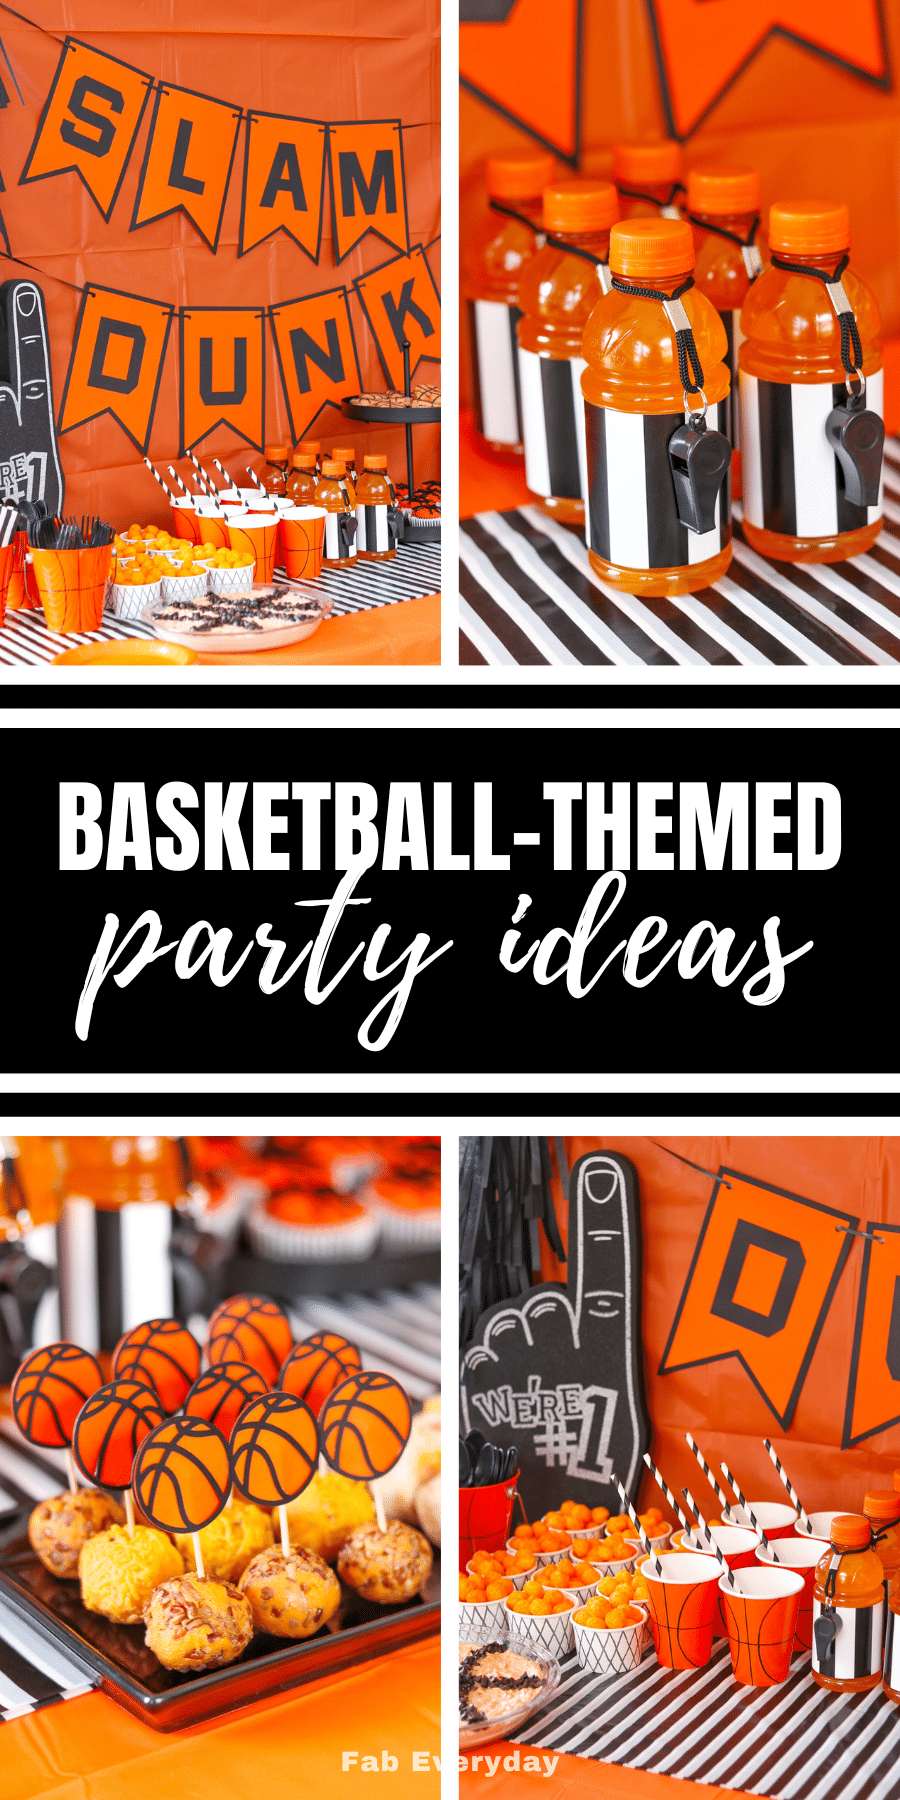 Basketball-Themed Party Ideas (great for a basketball watch party, birthday party, or team end-of-season celebration)